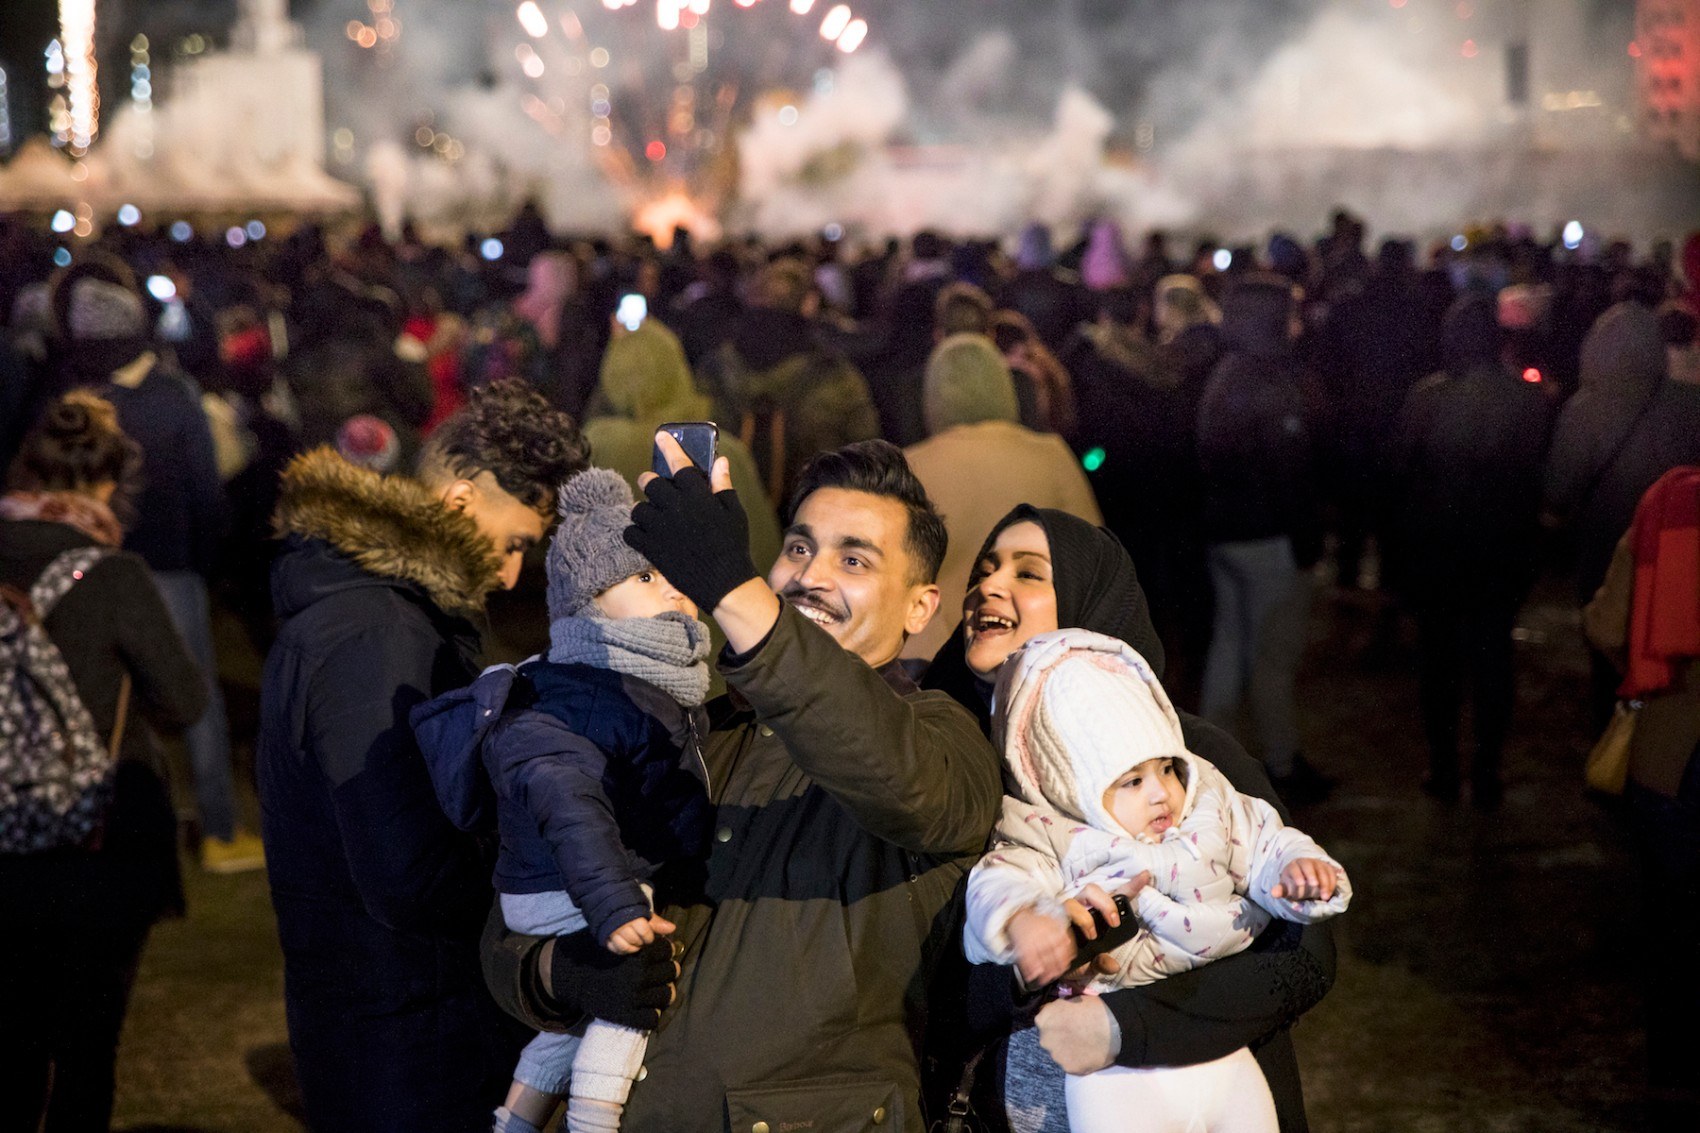 Man and woman holding a child each taking a selfie with fireworks in the background